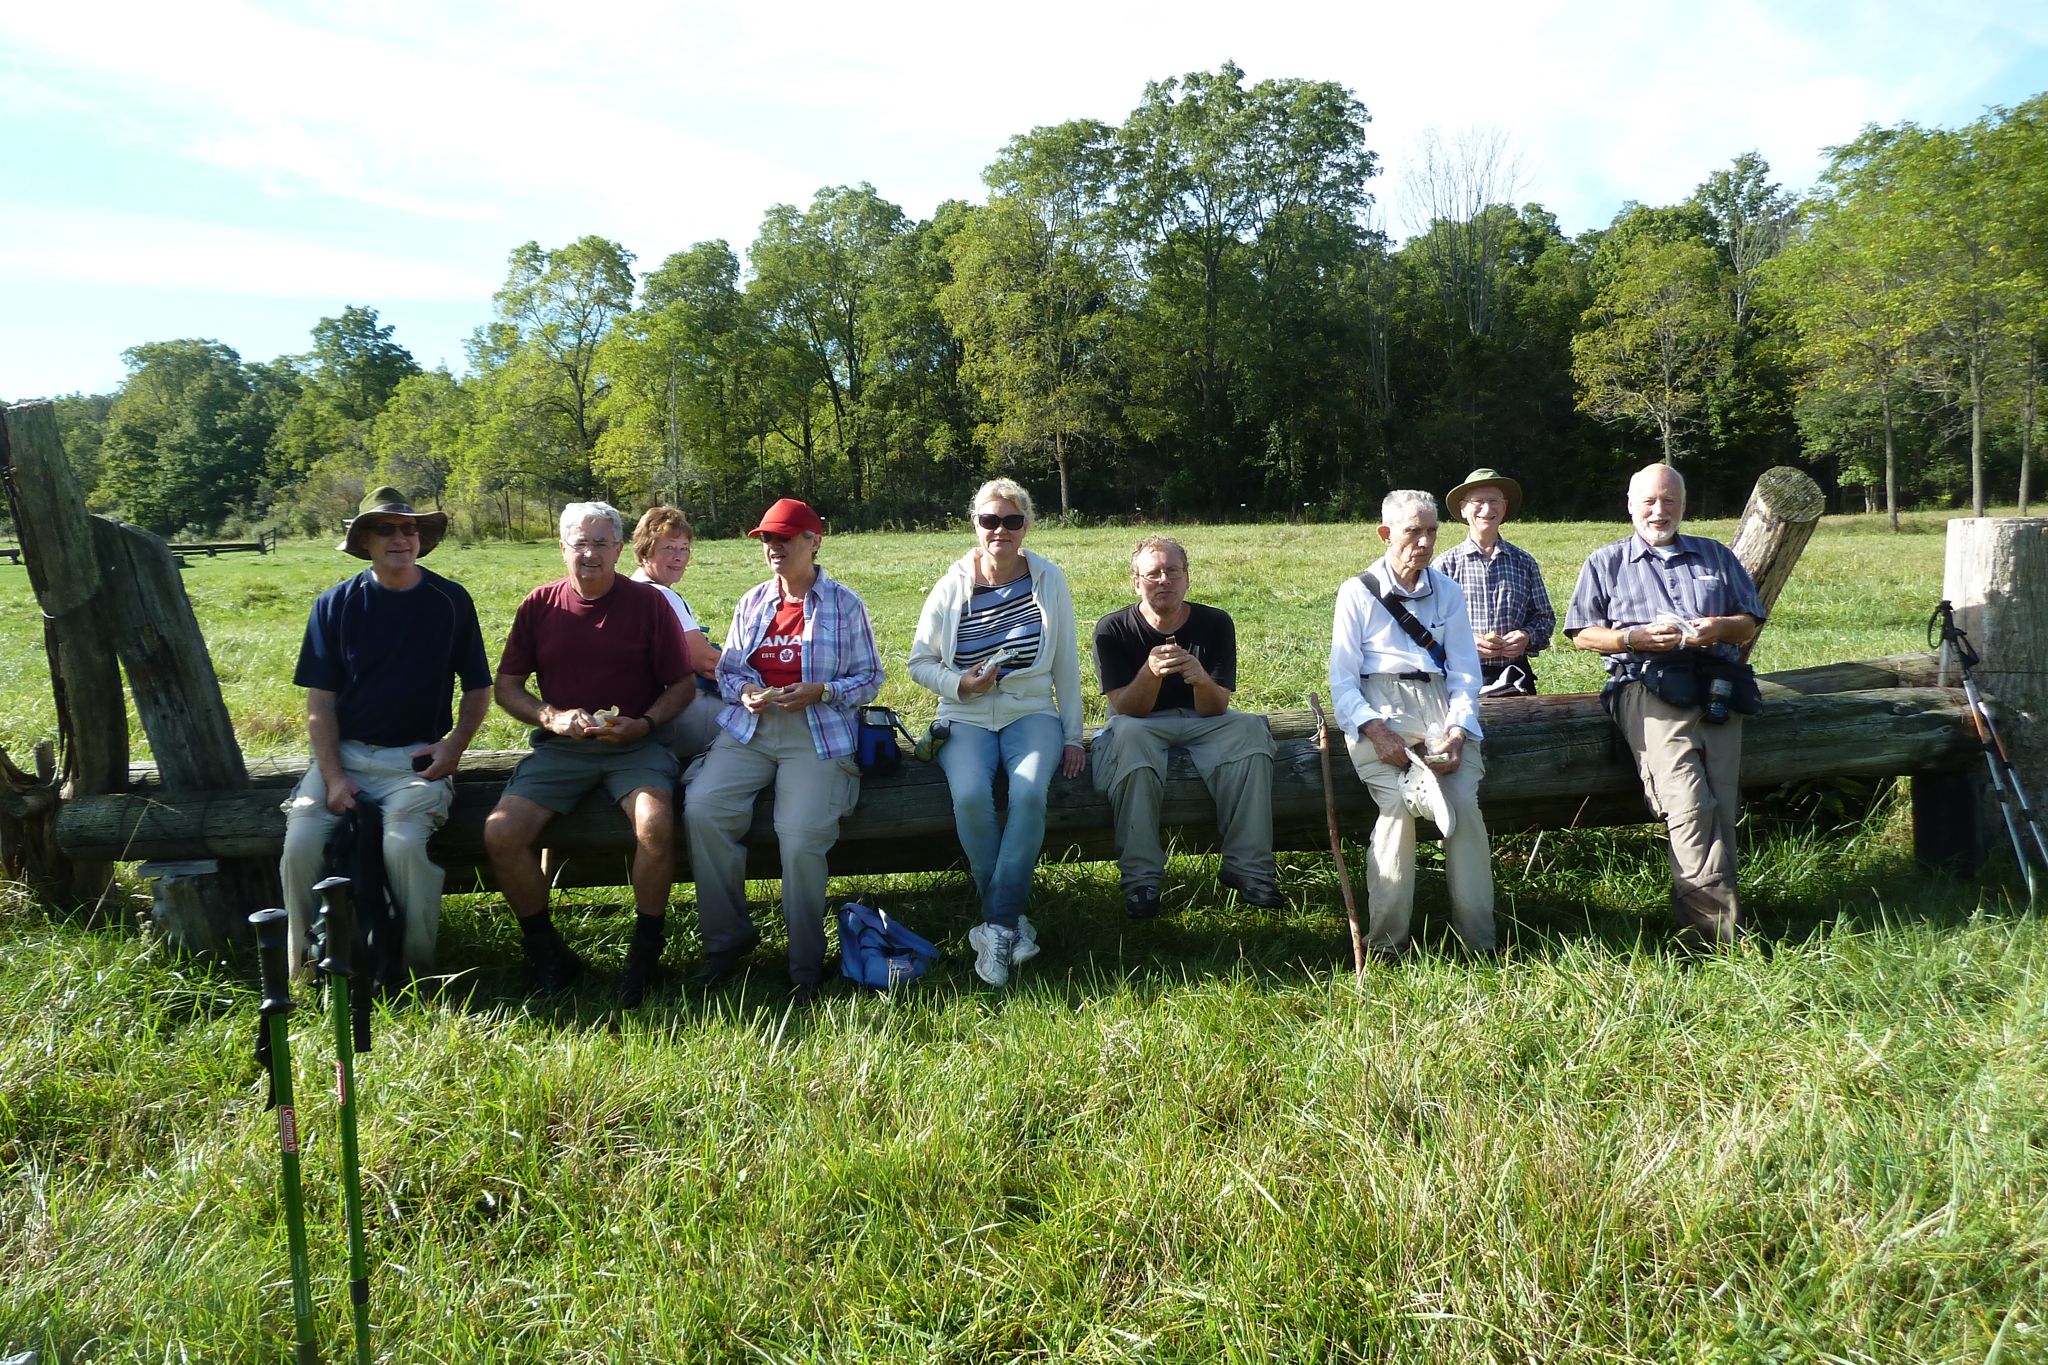 The group resting at horse farm on day 3 of our fortieth end-to-end.